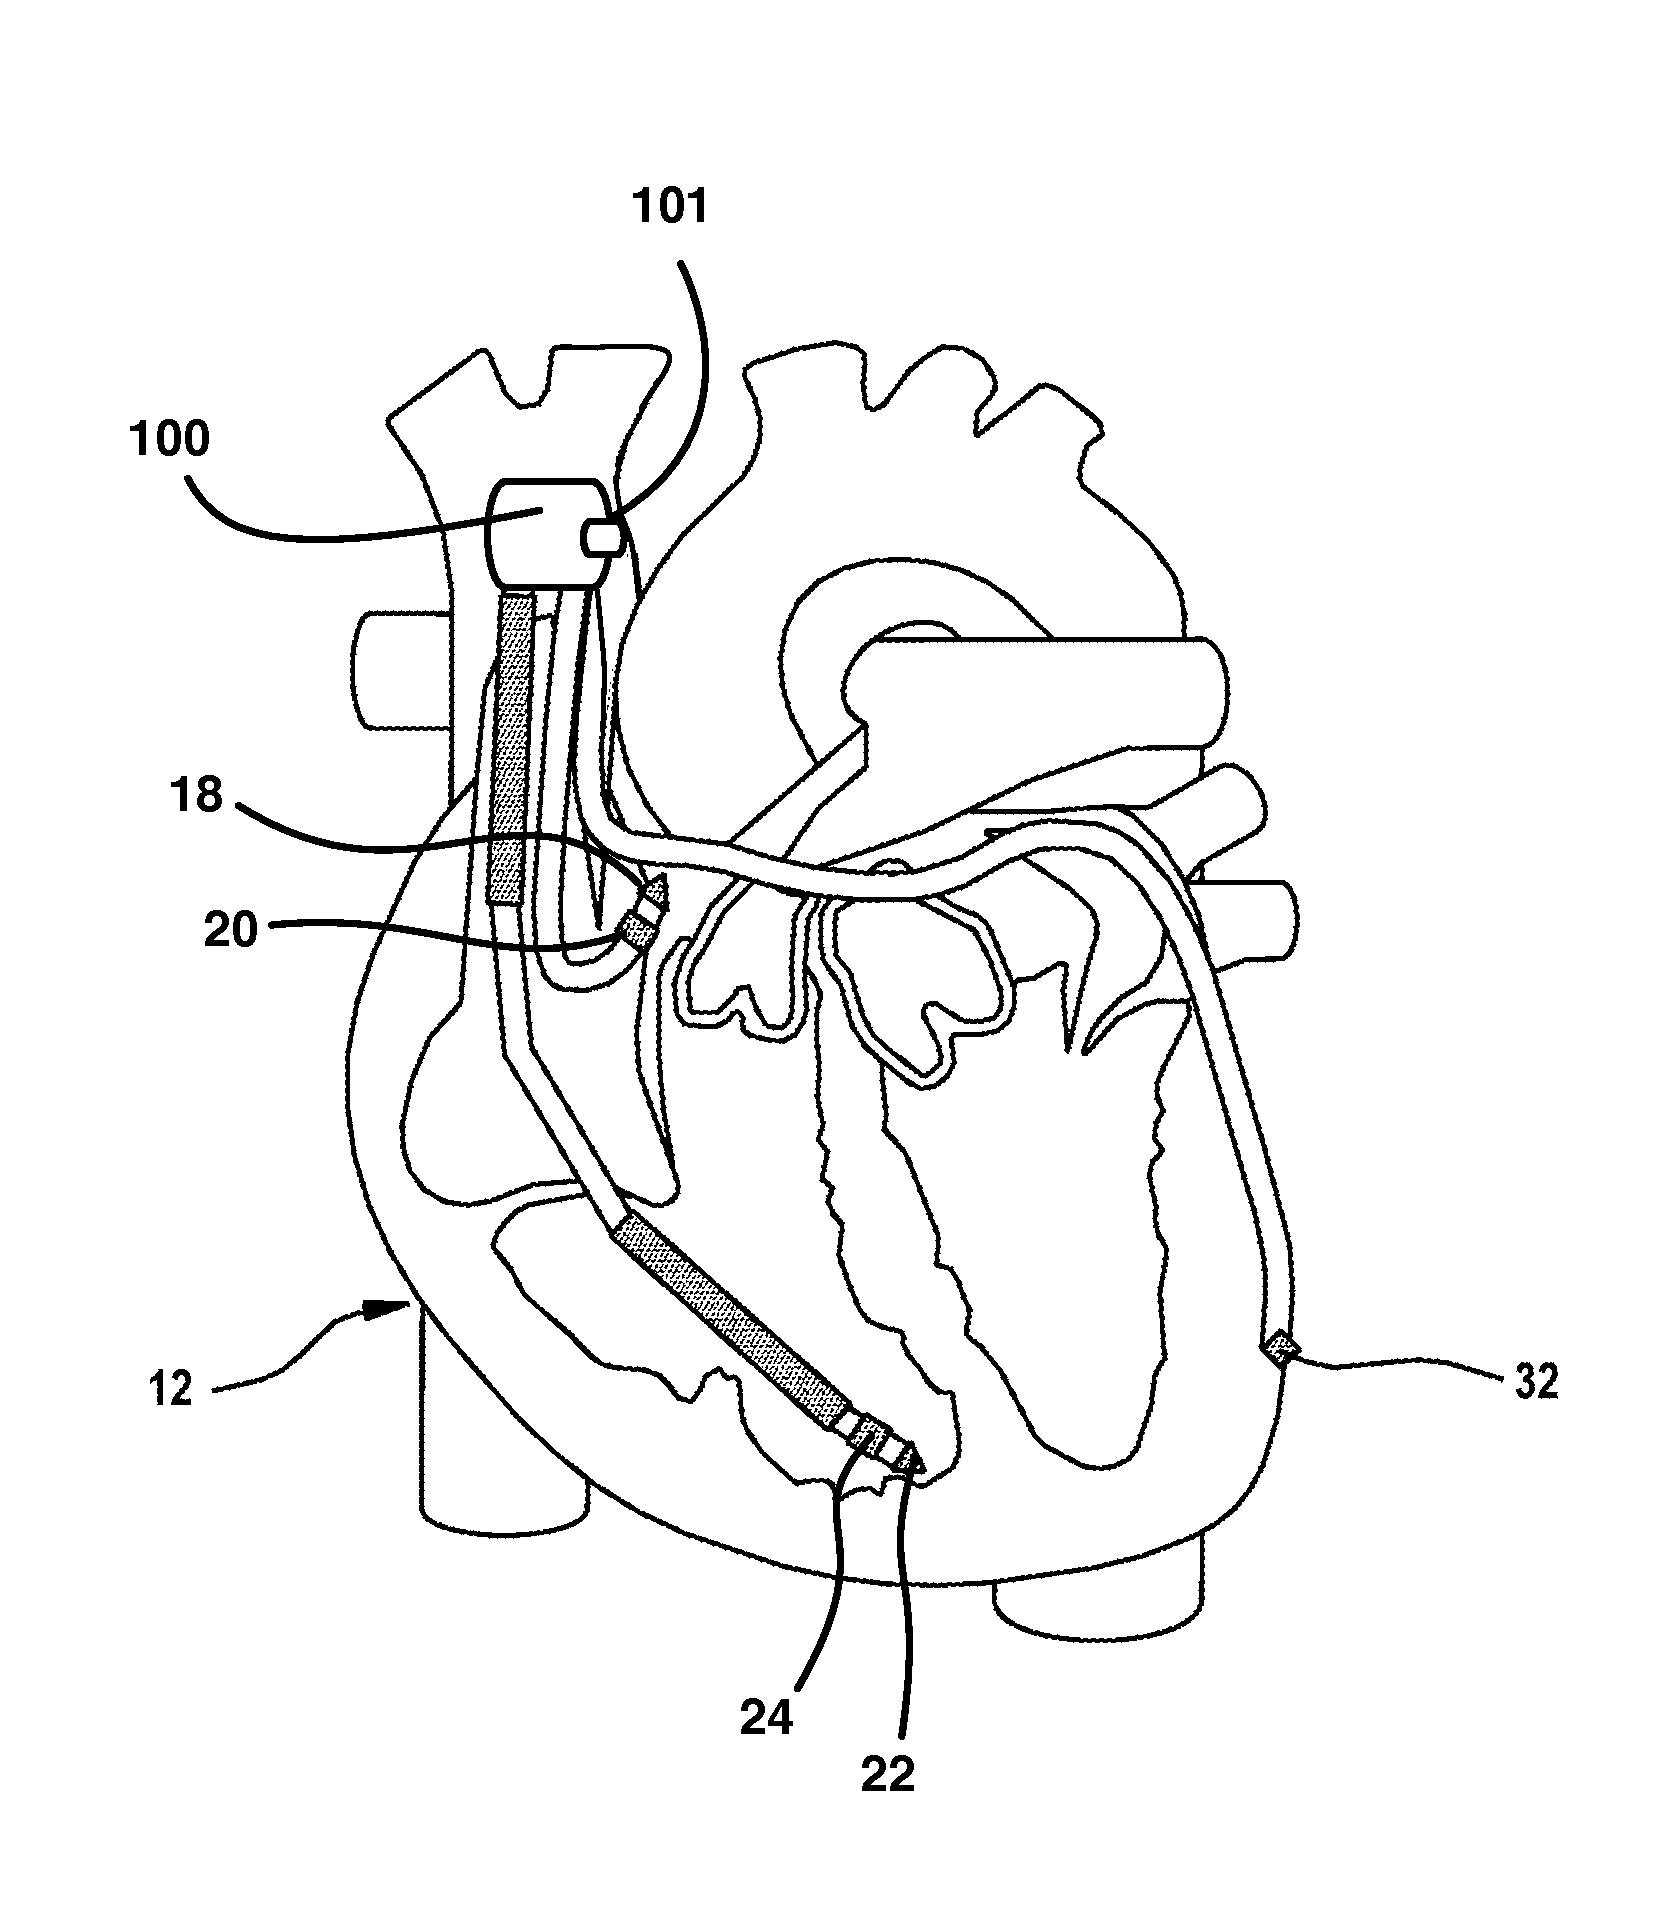 System for temporary fixation of an implantable medical device